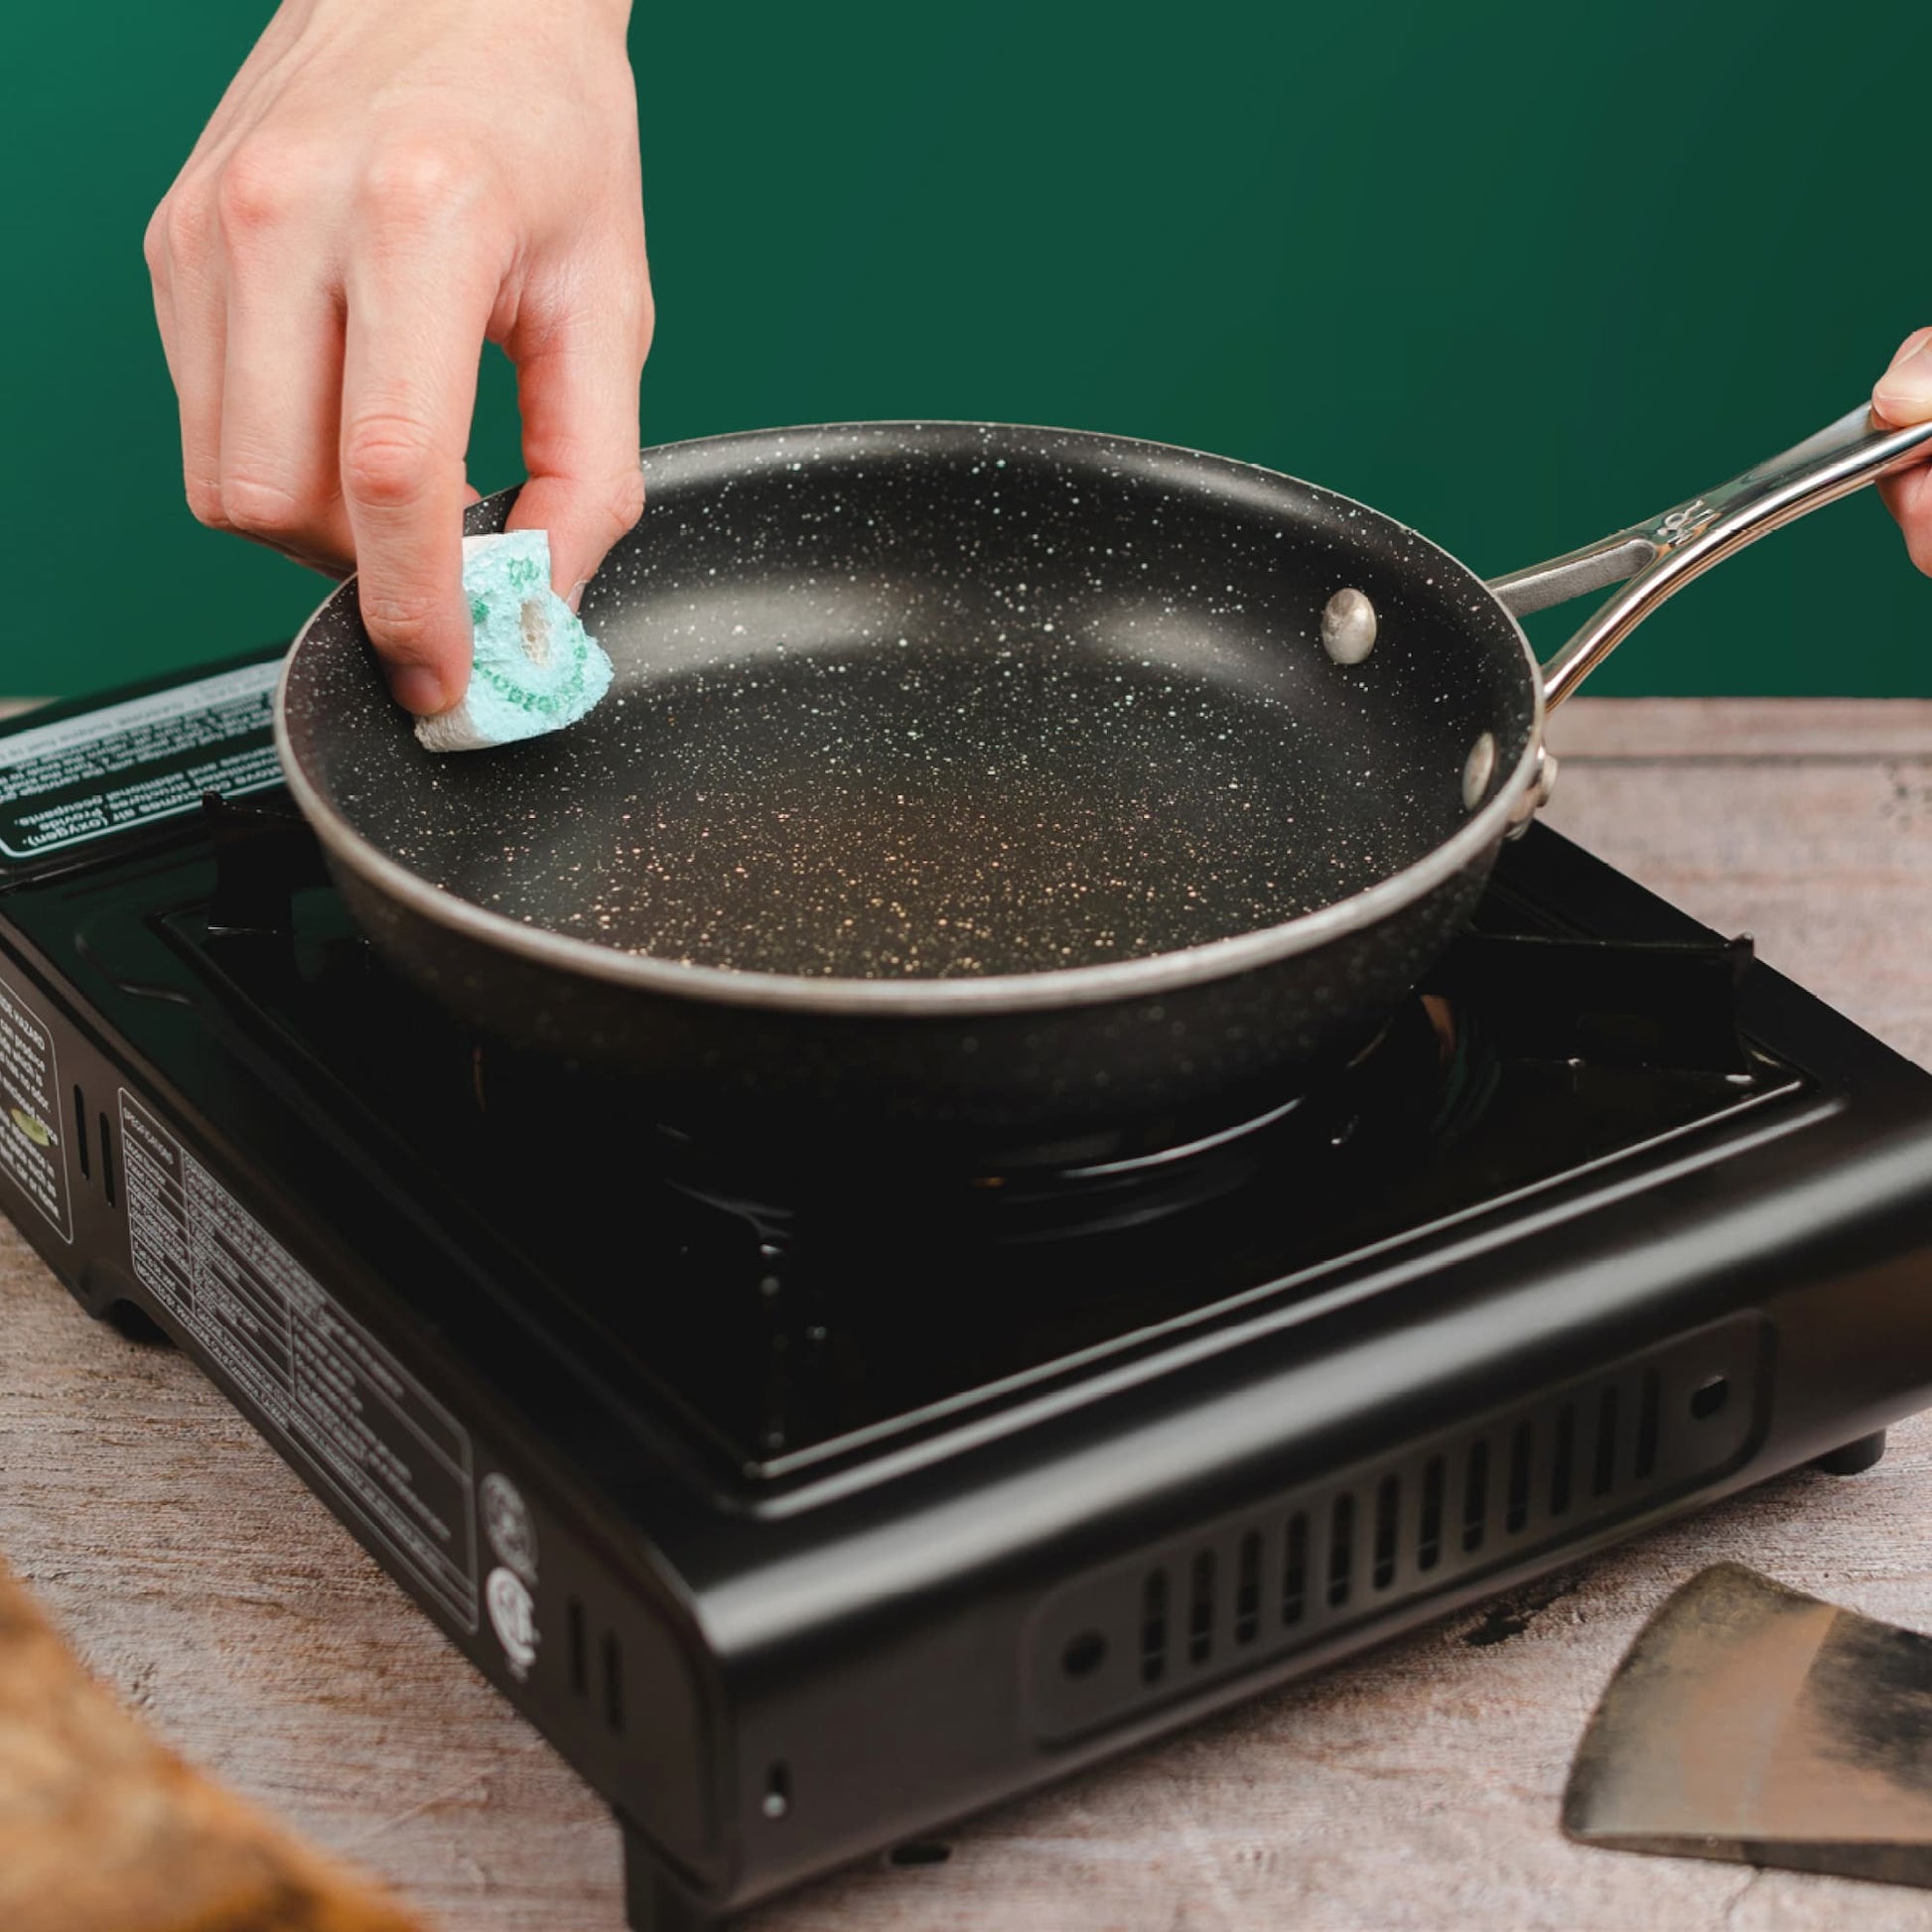 Sponge n' Go on-the-go for your pans and portable stove